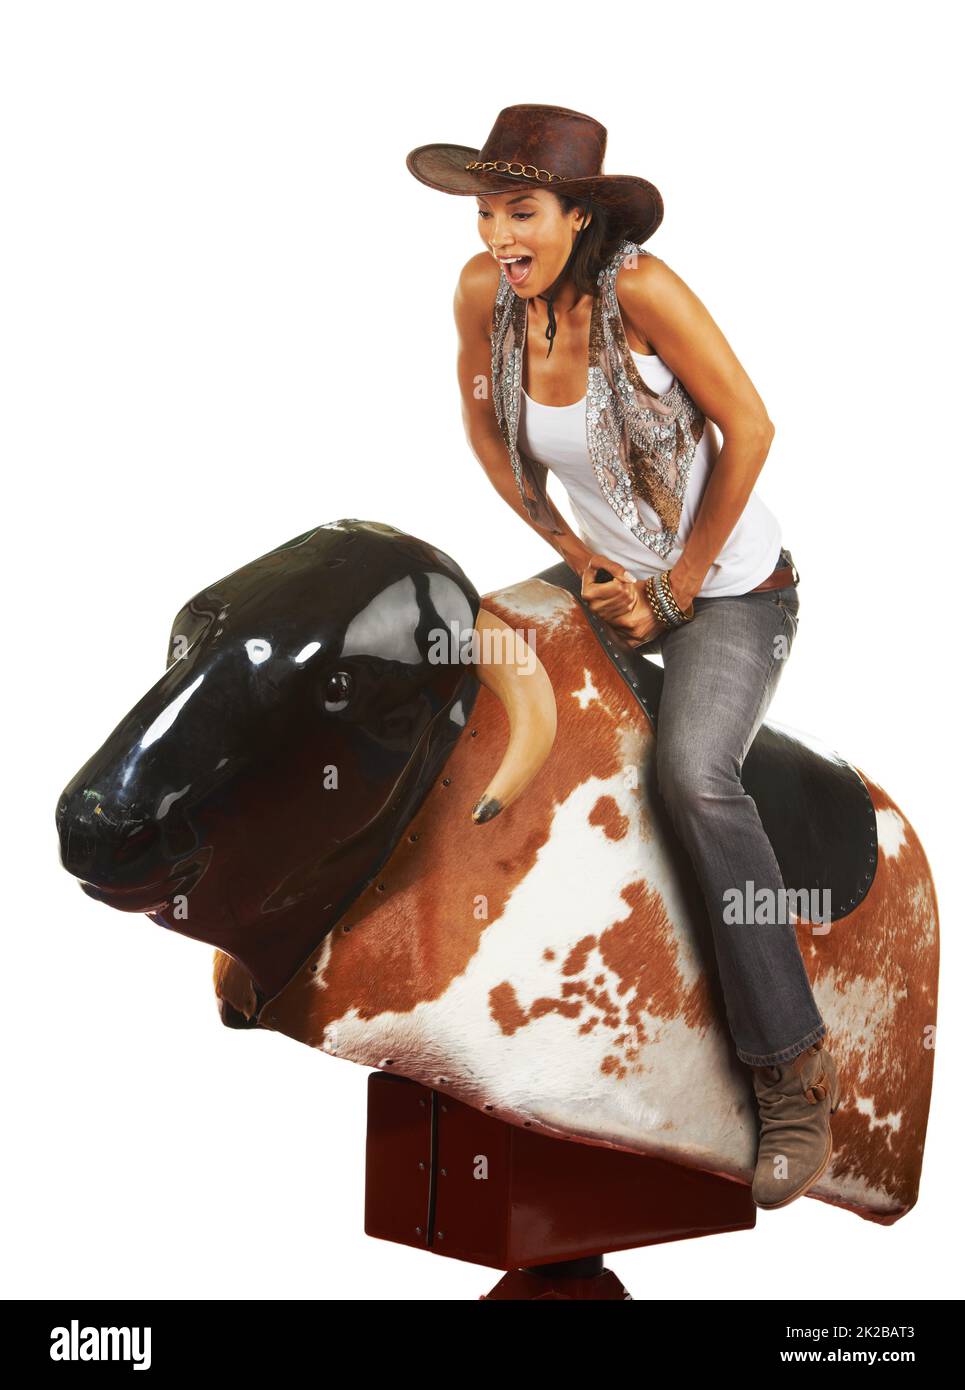 Woah. Studio shot of a beautiful young woman riding a mechanical bull against a white background. Stock Photo